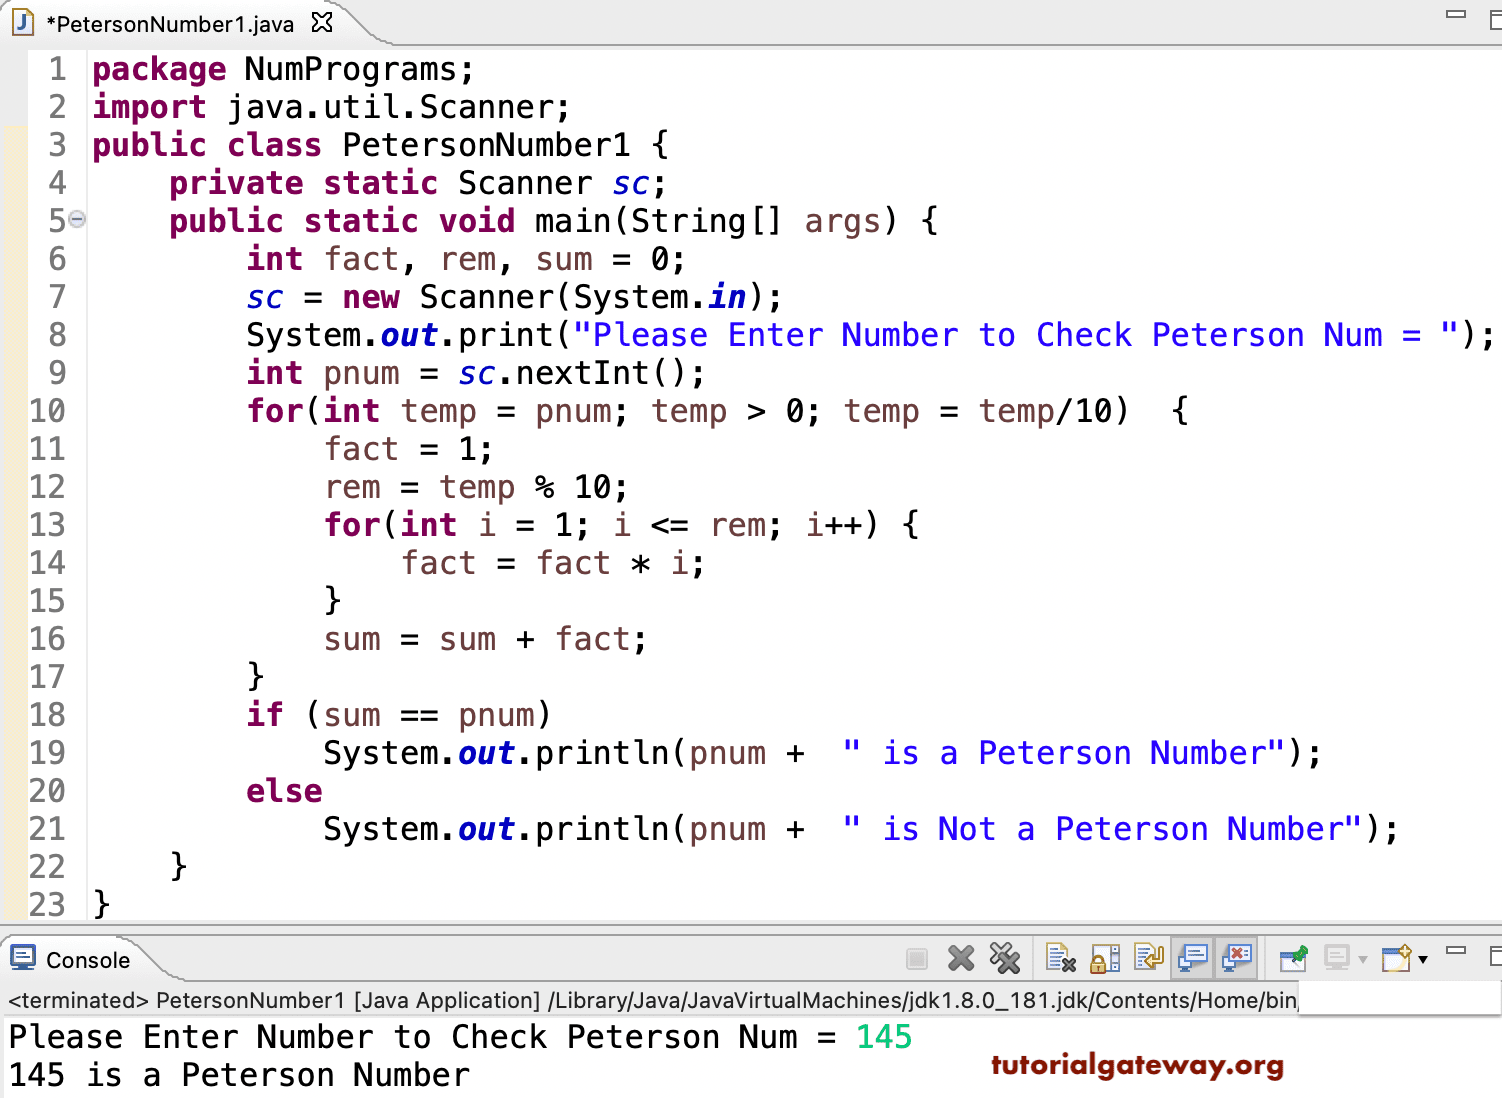 Java Program to Check Peterson Number